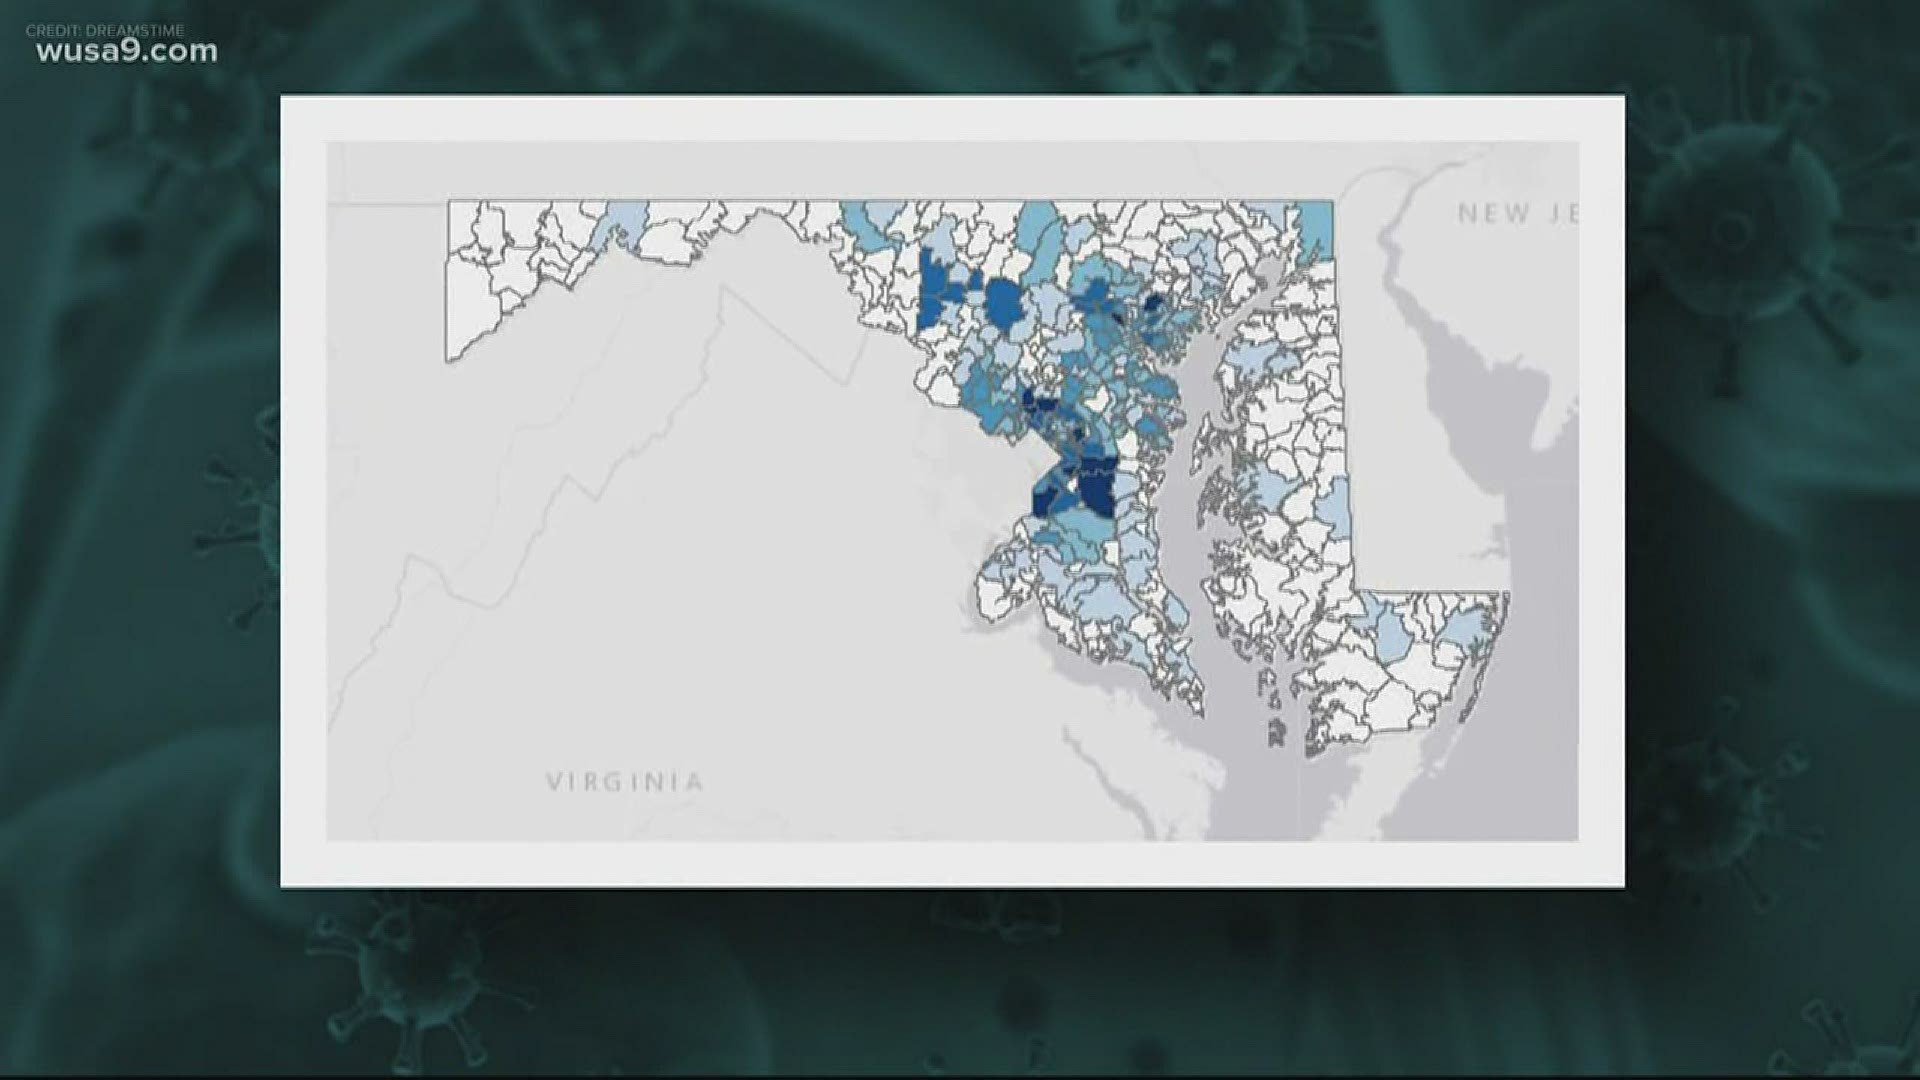 Officials Maryland Zip Code Coronavirus Map Could Be Misleading